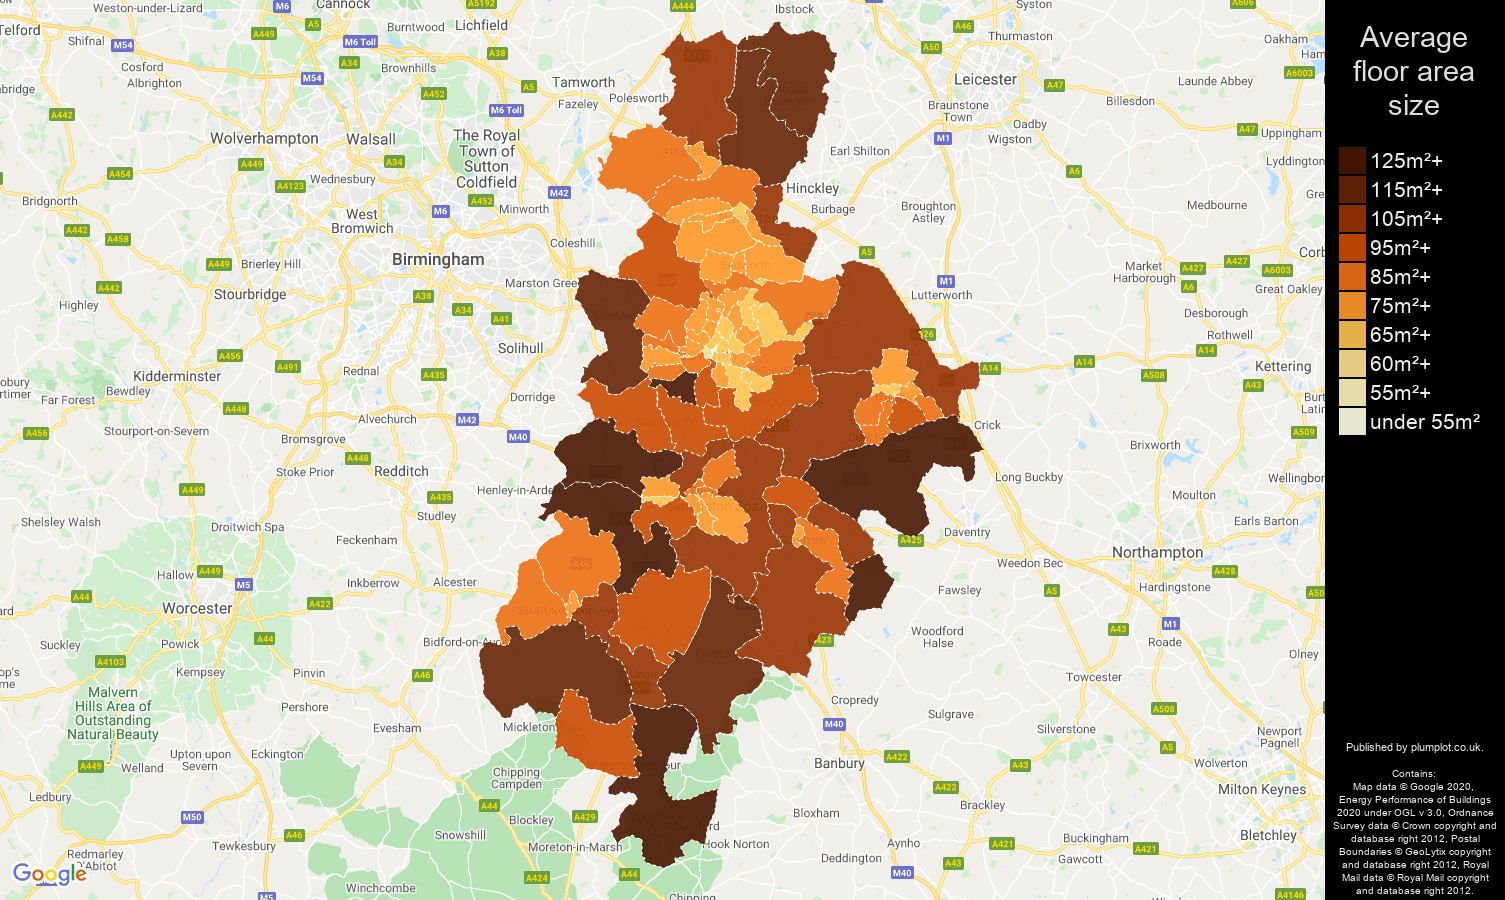 Coventry map of average floor area size of properties